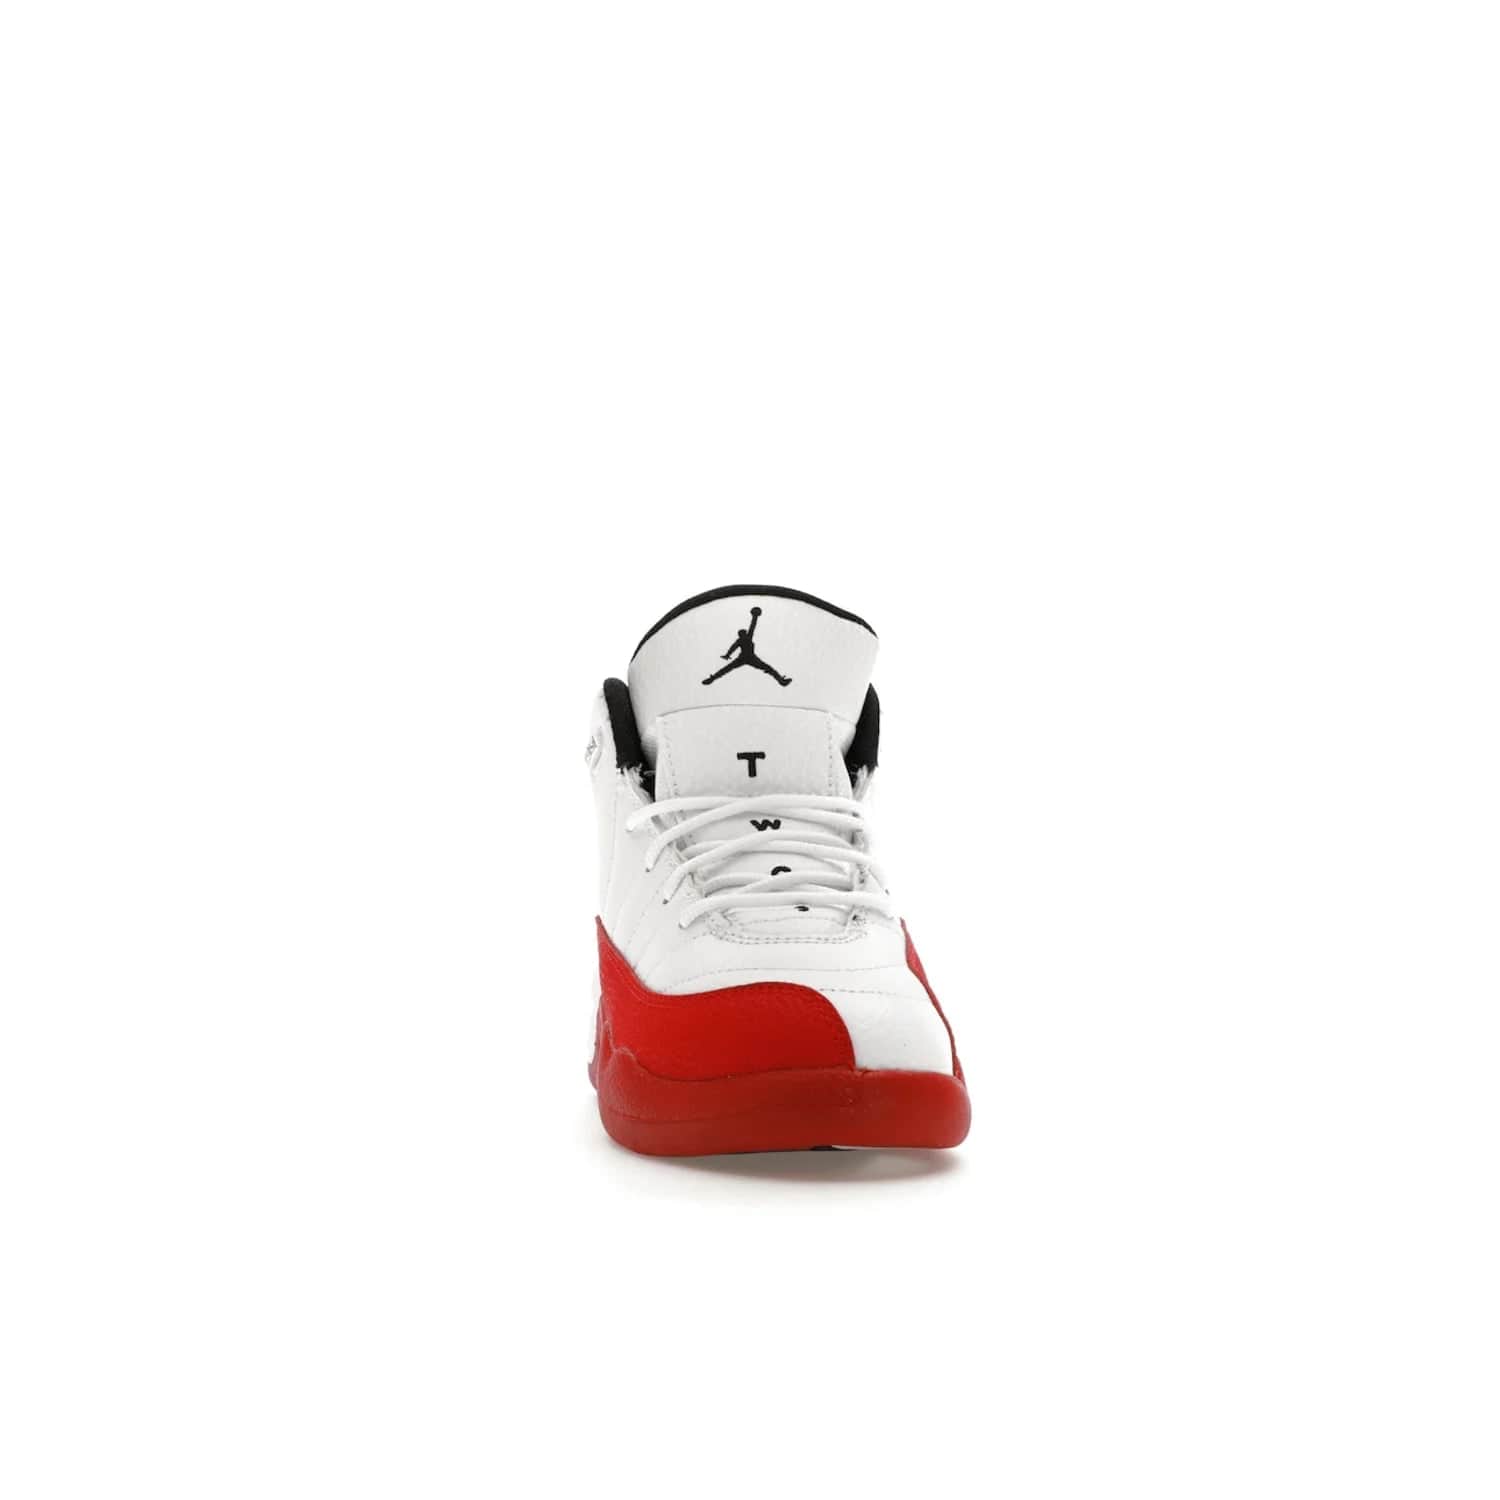 Jordan 12 Retro Cherry (2023) (PS) - Image 9 - Only at www.BallersClubKickz.com - Jordan 12 Retro Cherry dropping for toddlers in 2023! White leather upper with black overlays and red branding. Classic court style for your little one.